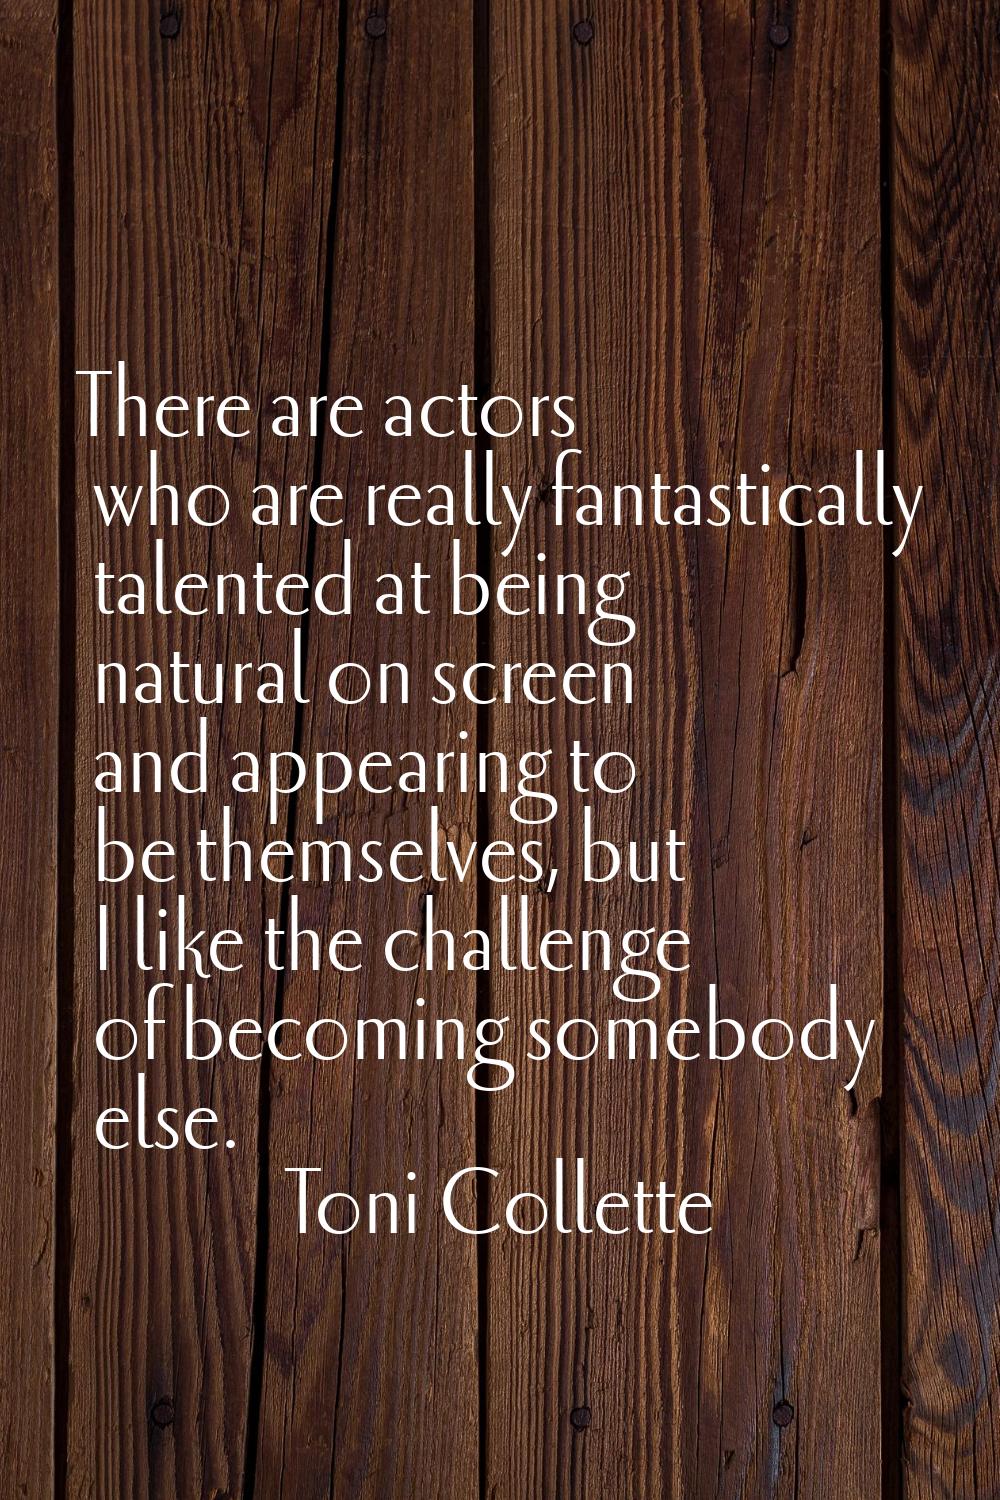 There are actors who are really fantastically talented at being natural on screen and appearing to 